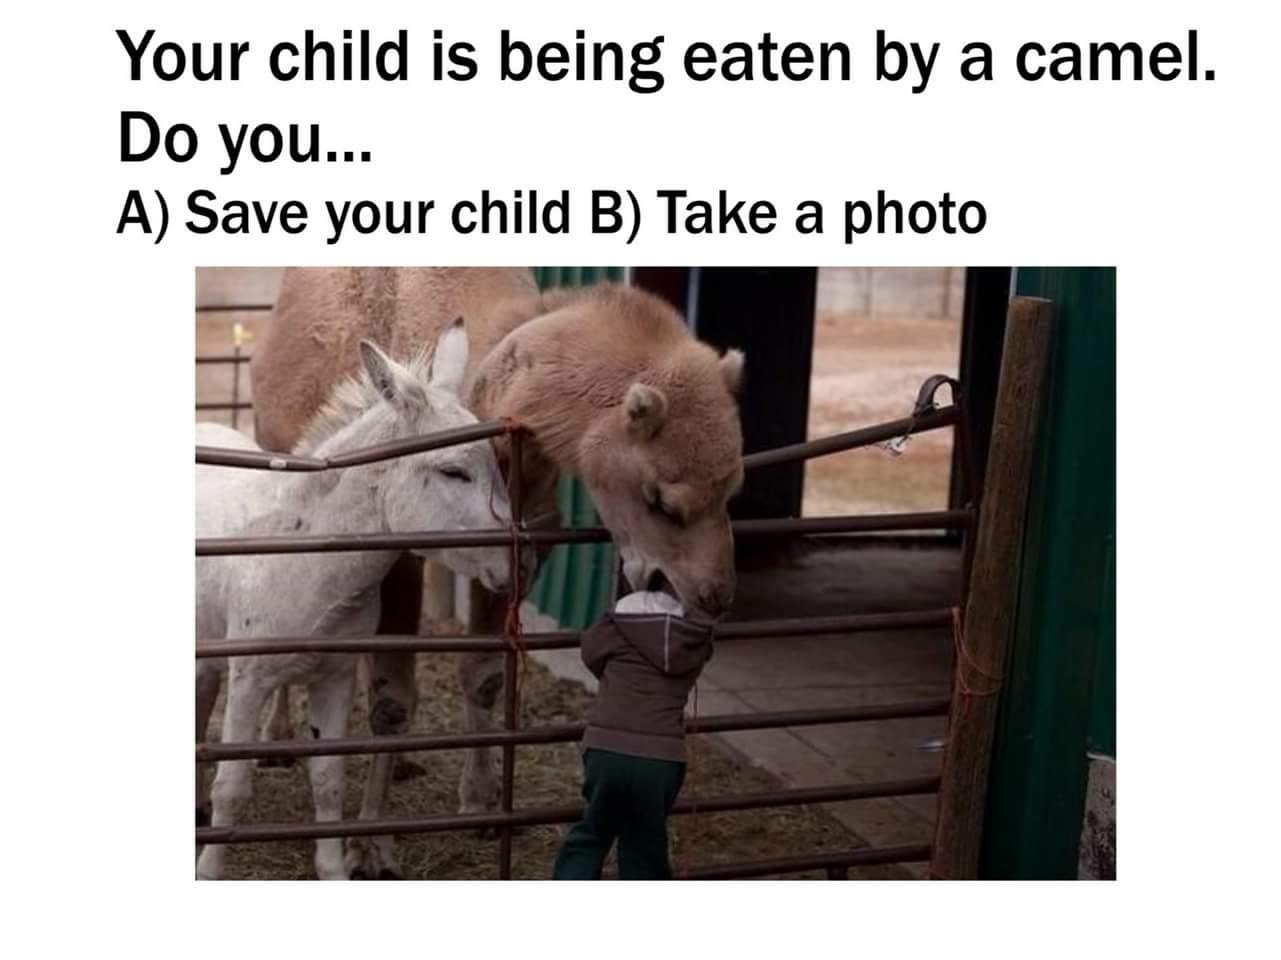 your child is being eaten by a camel - Your child is being eaten by a camel. Do you... A Save your child B Take a photo